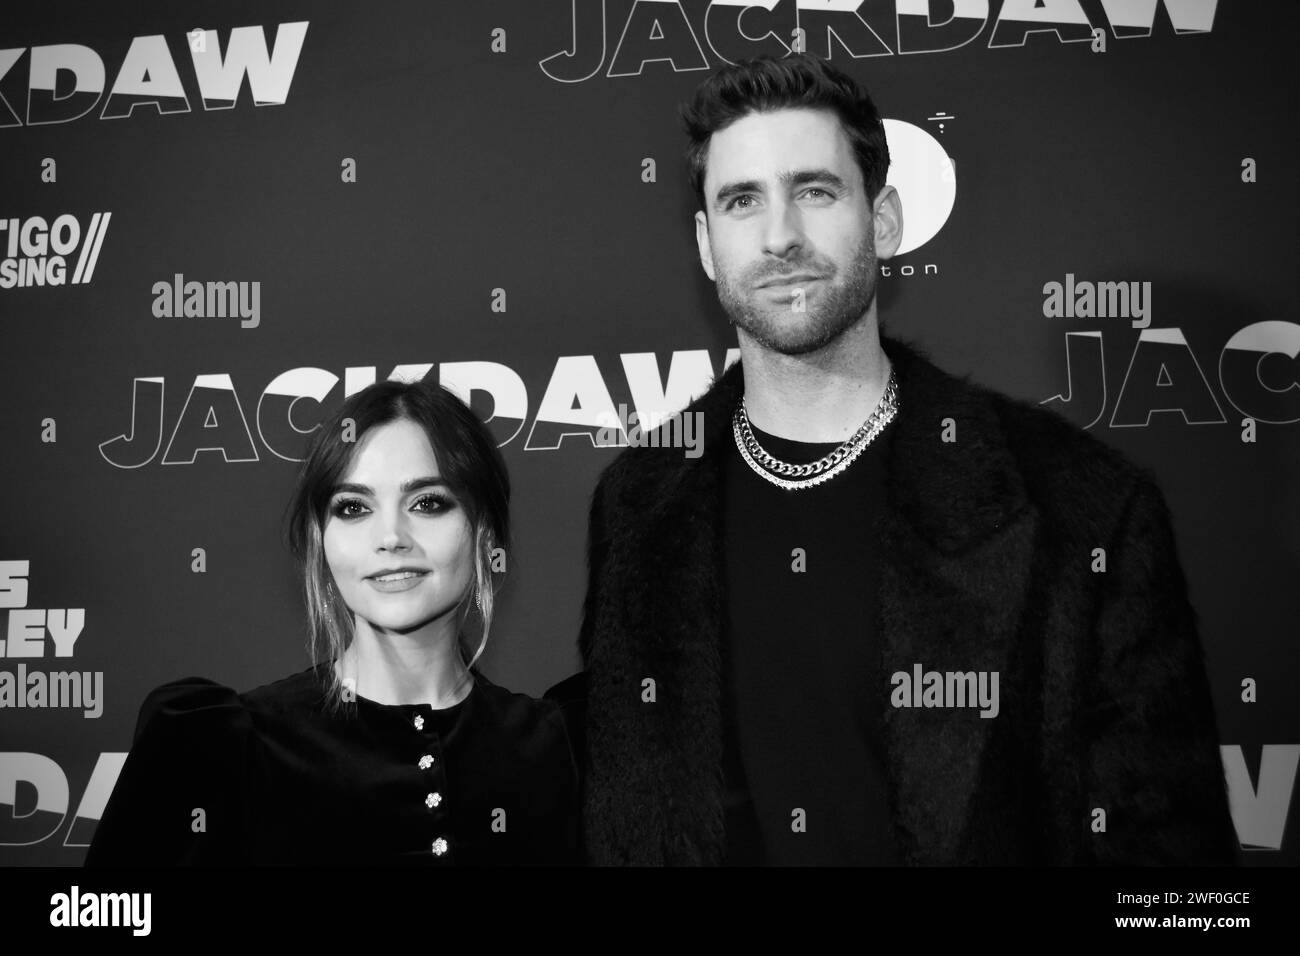 Co-stars Jenna Coleman and Oliver Jackson-Cohen pictured together on the red carpet at the premiere of 'Jackdaw'. Credit: James Hind/Alamy. Stock Photo